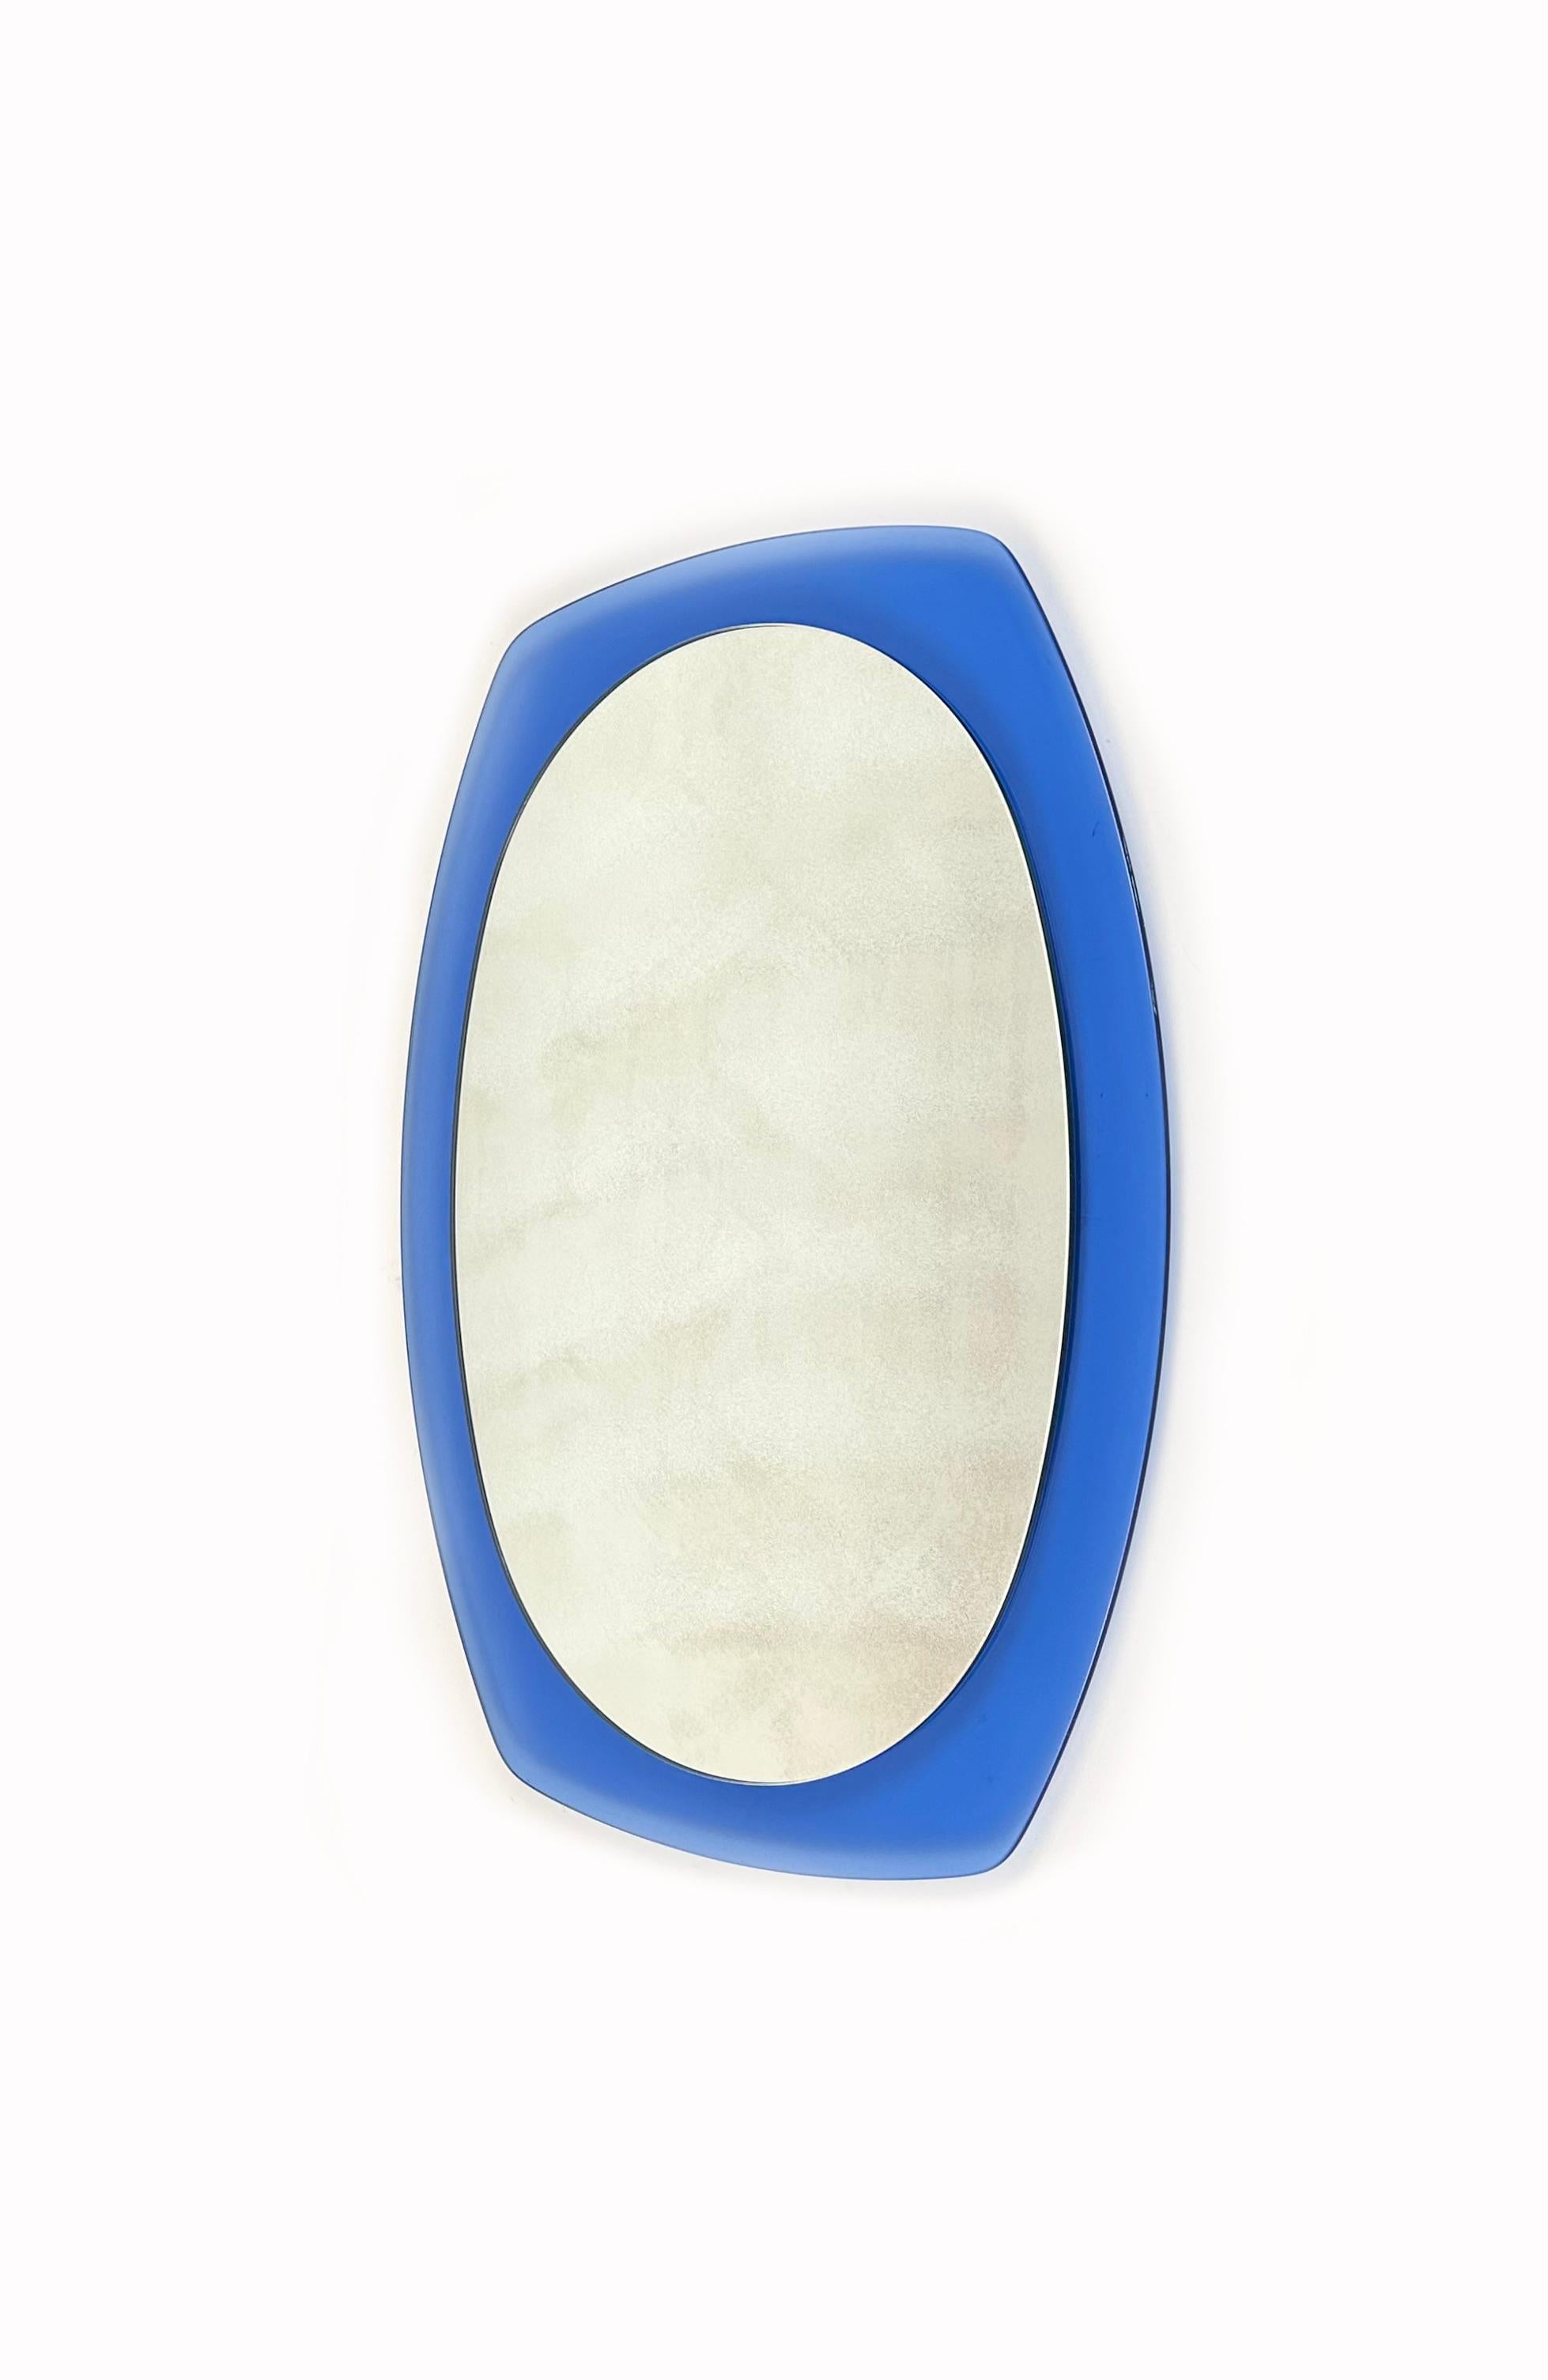 Late 20th Century Midcentury Wall Mirror Blue Glass by Veca, Italy, 1970s For Sale